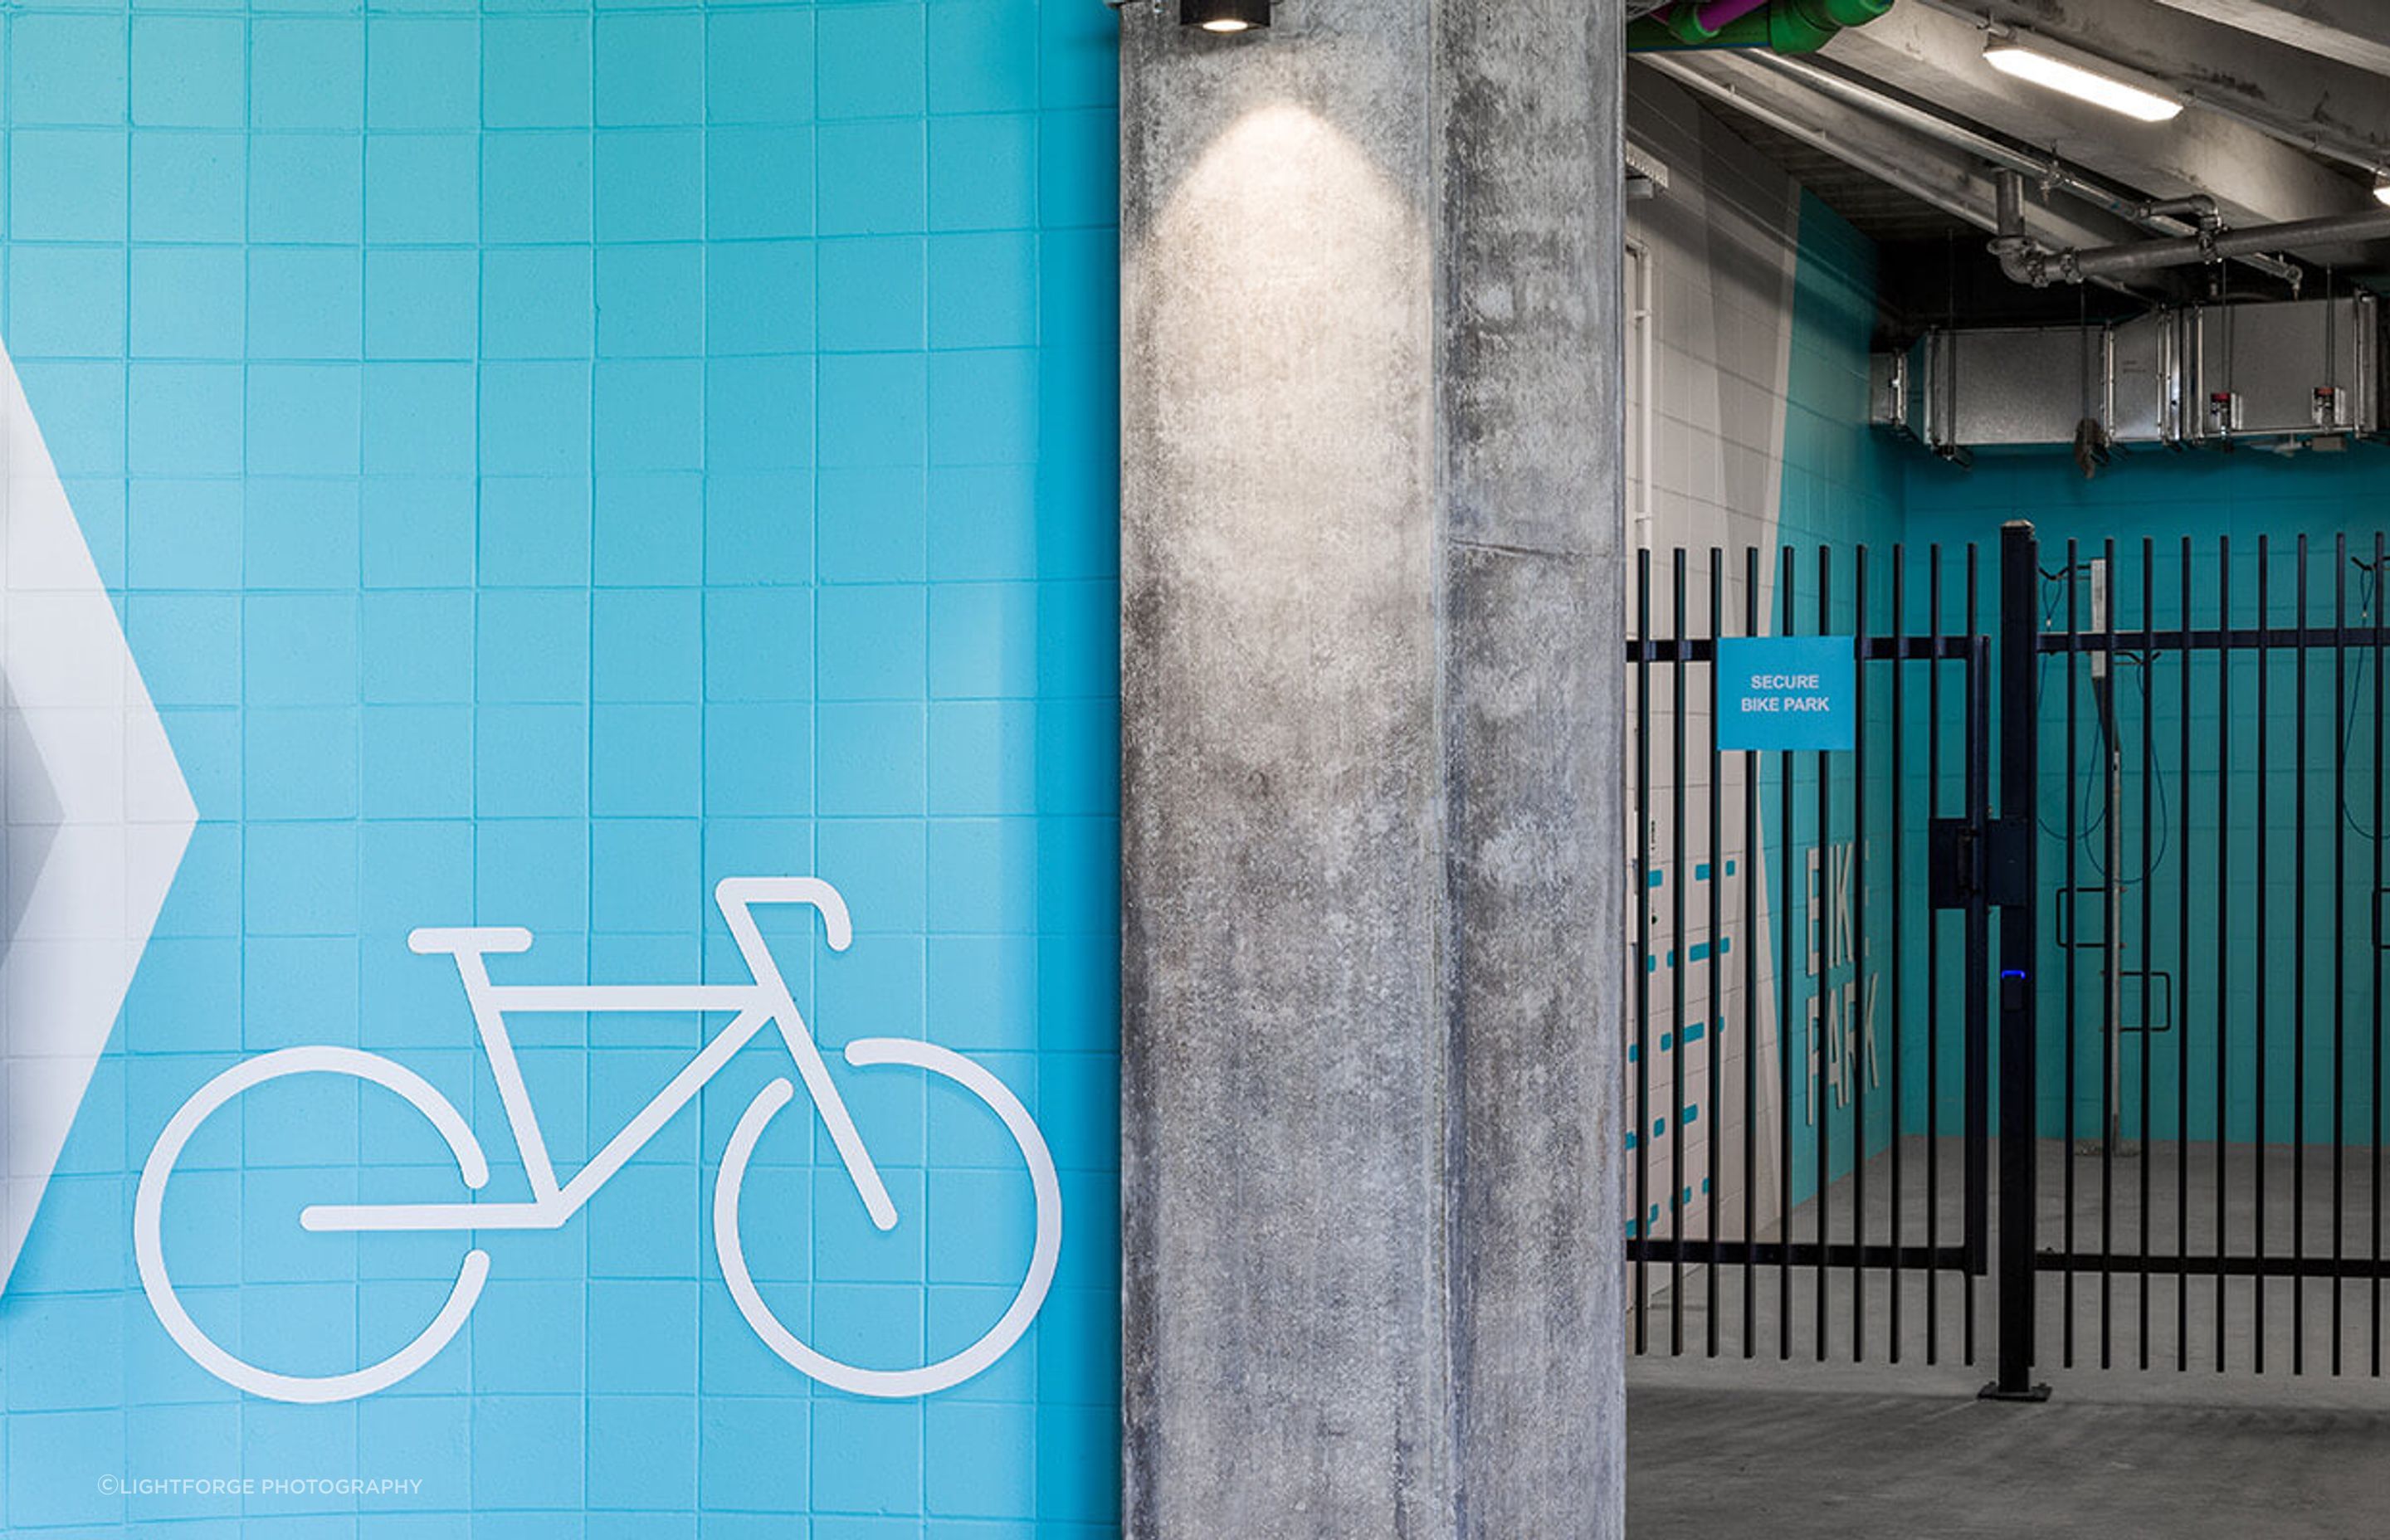 There are 48 end-of-trip bike racks and lockers available for tenants.